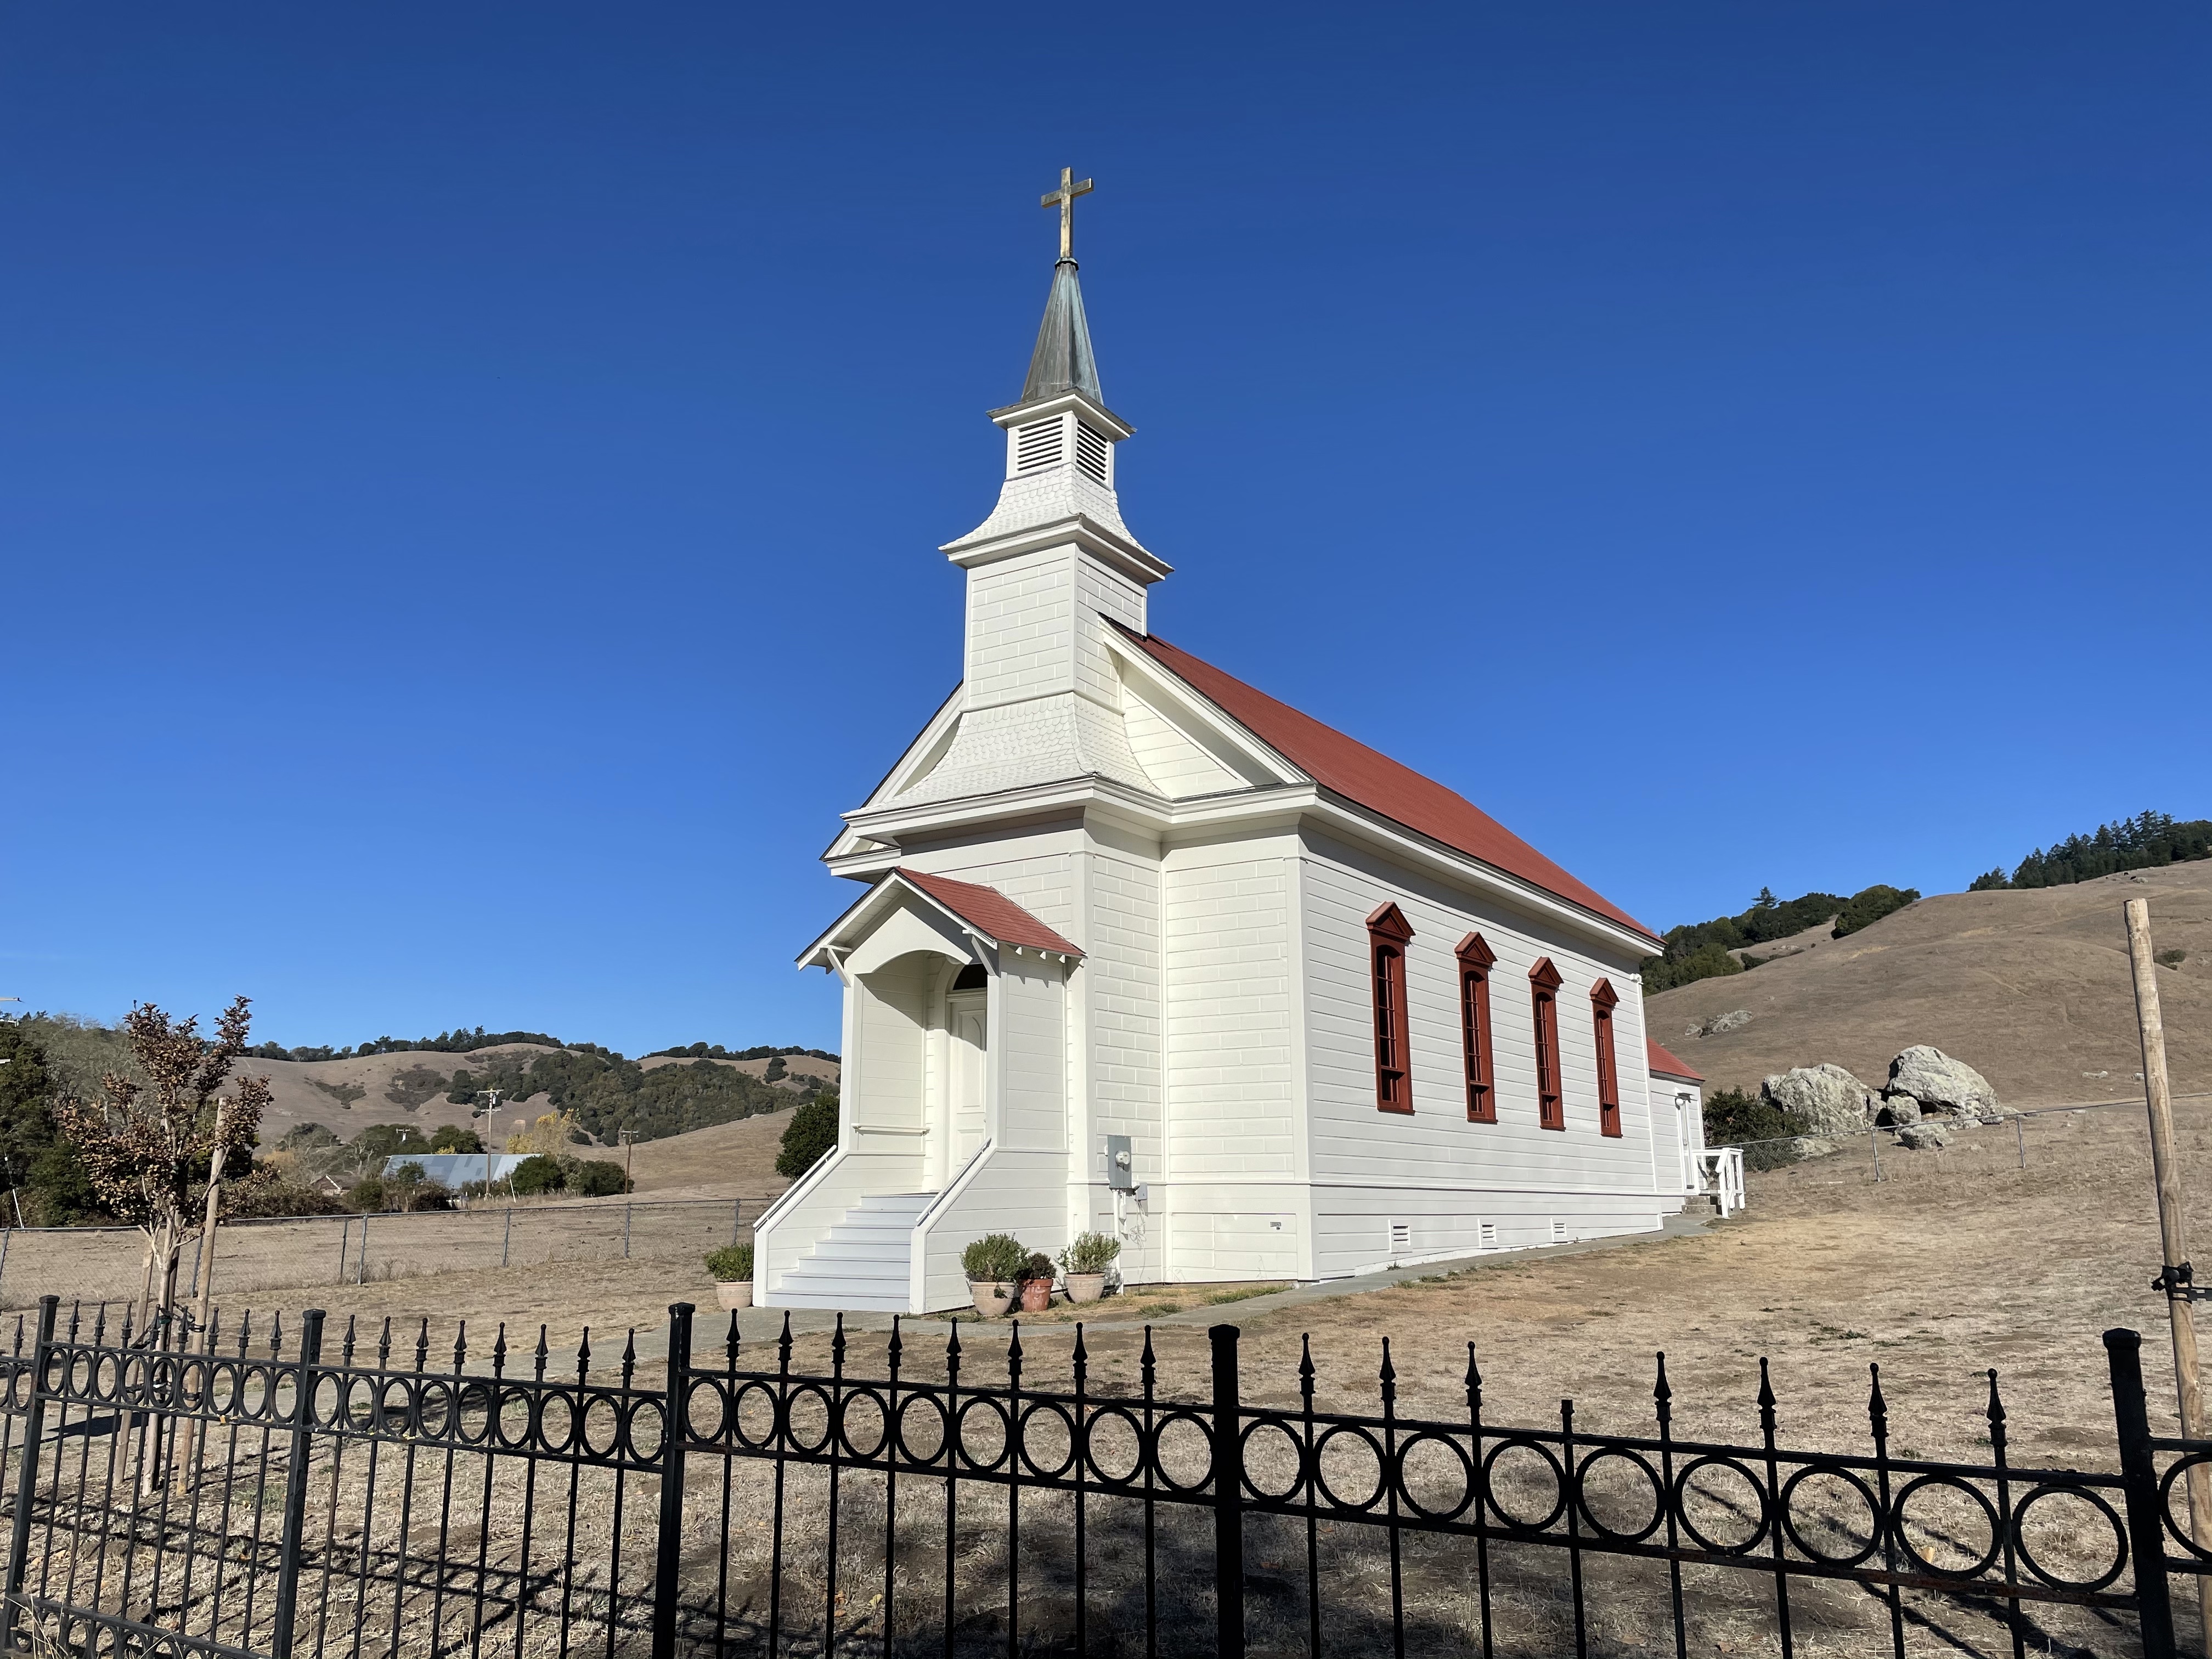 iPhone 12 mini sample photo: Again, the colors of this shot of the Nicasio church are true-to-life. Daytime shots like this are beautifully crisp and clear.